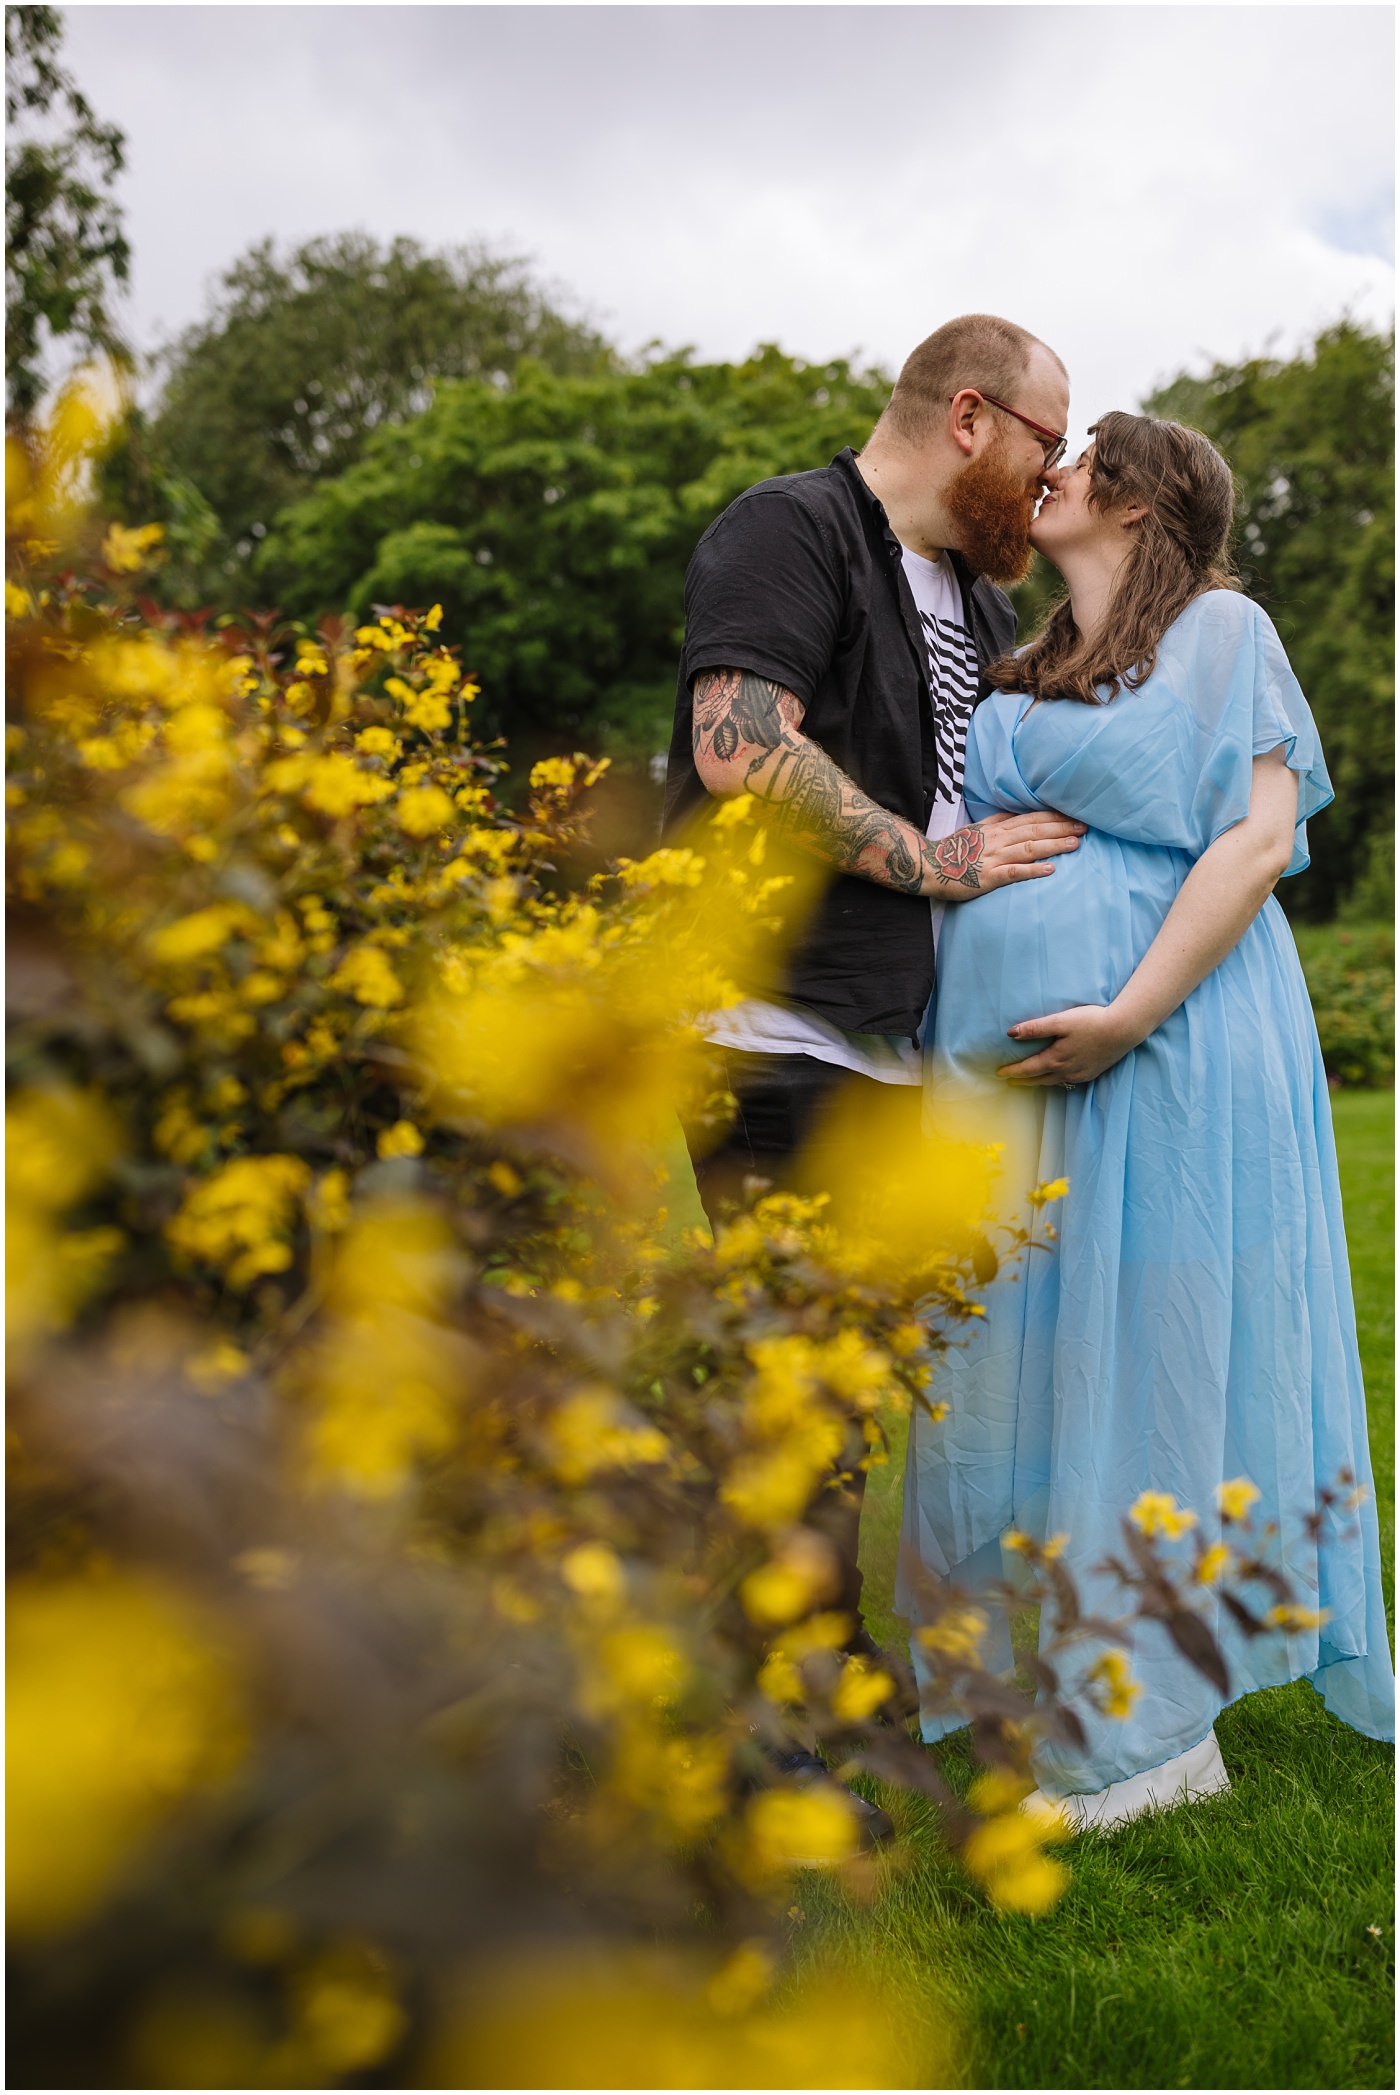 Manchester Maternity Photography by Nik Bryant